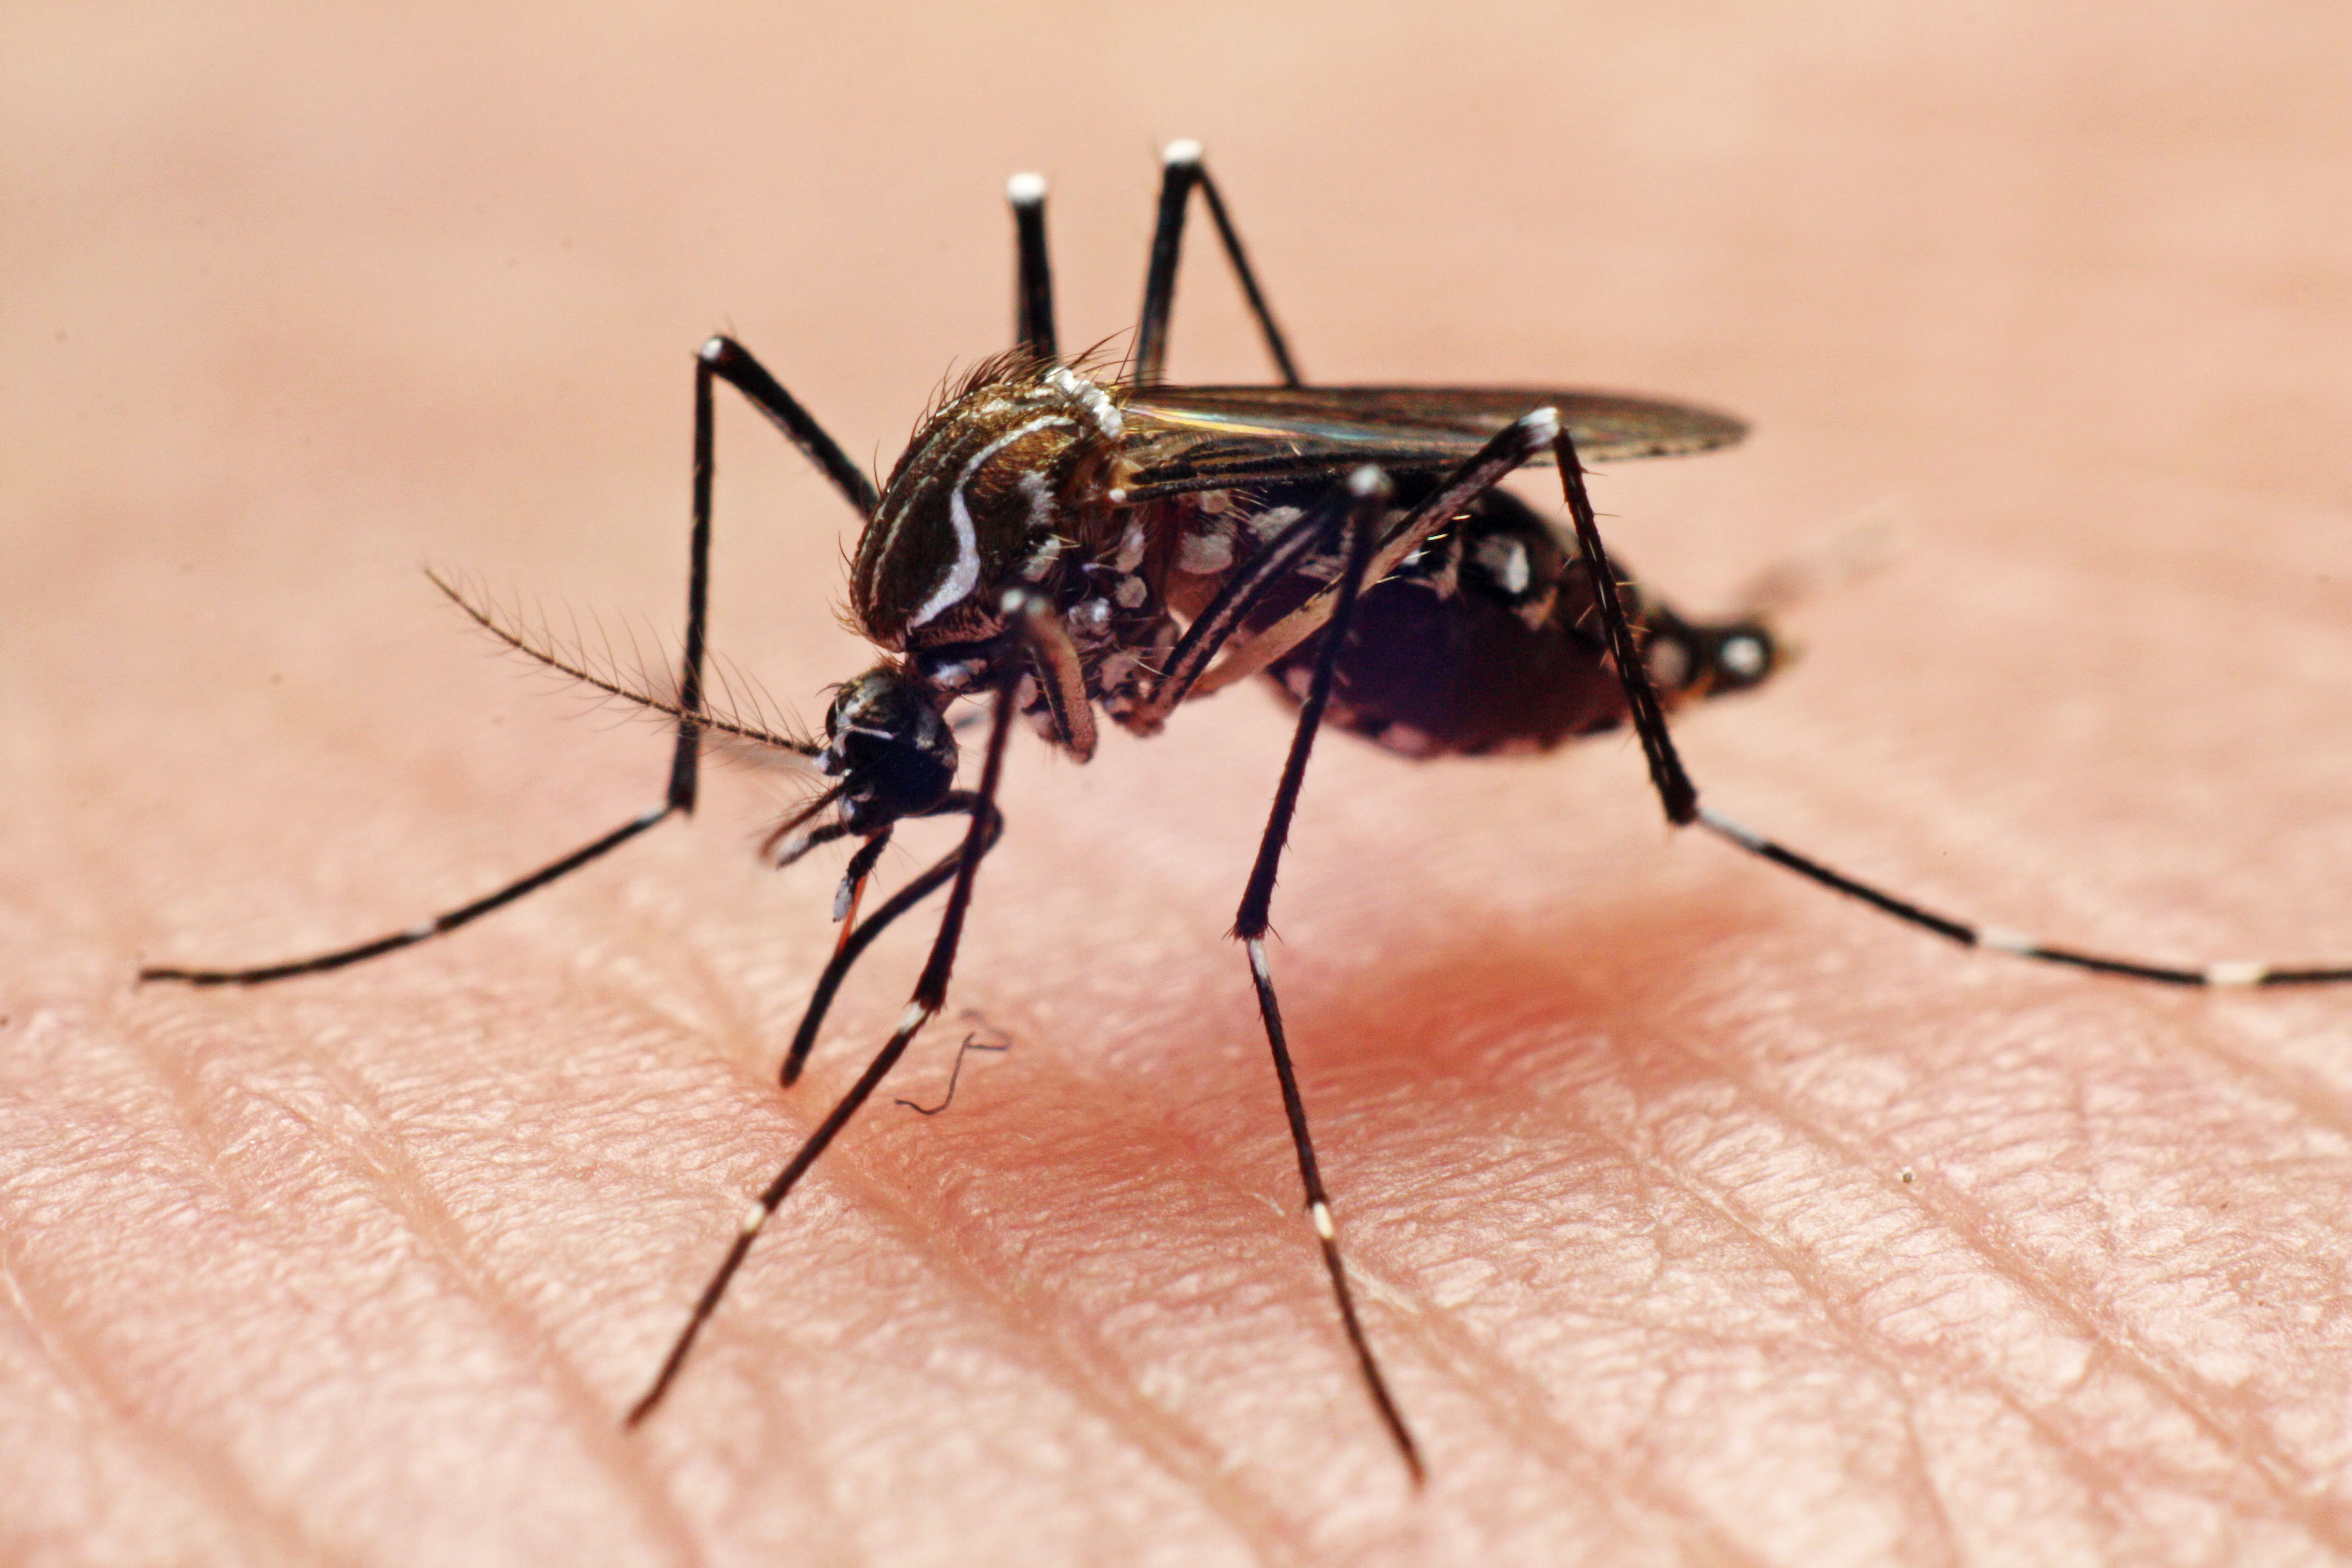 SoCal Sees Ankle Biter Mosquito Invasion